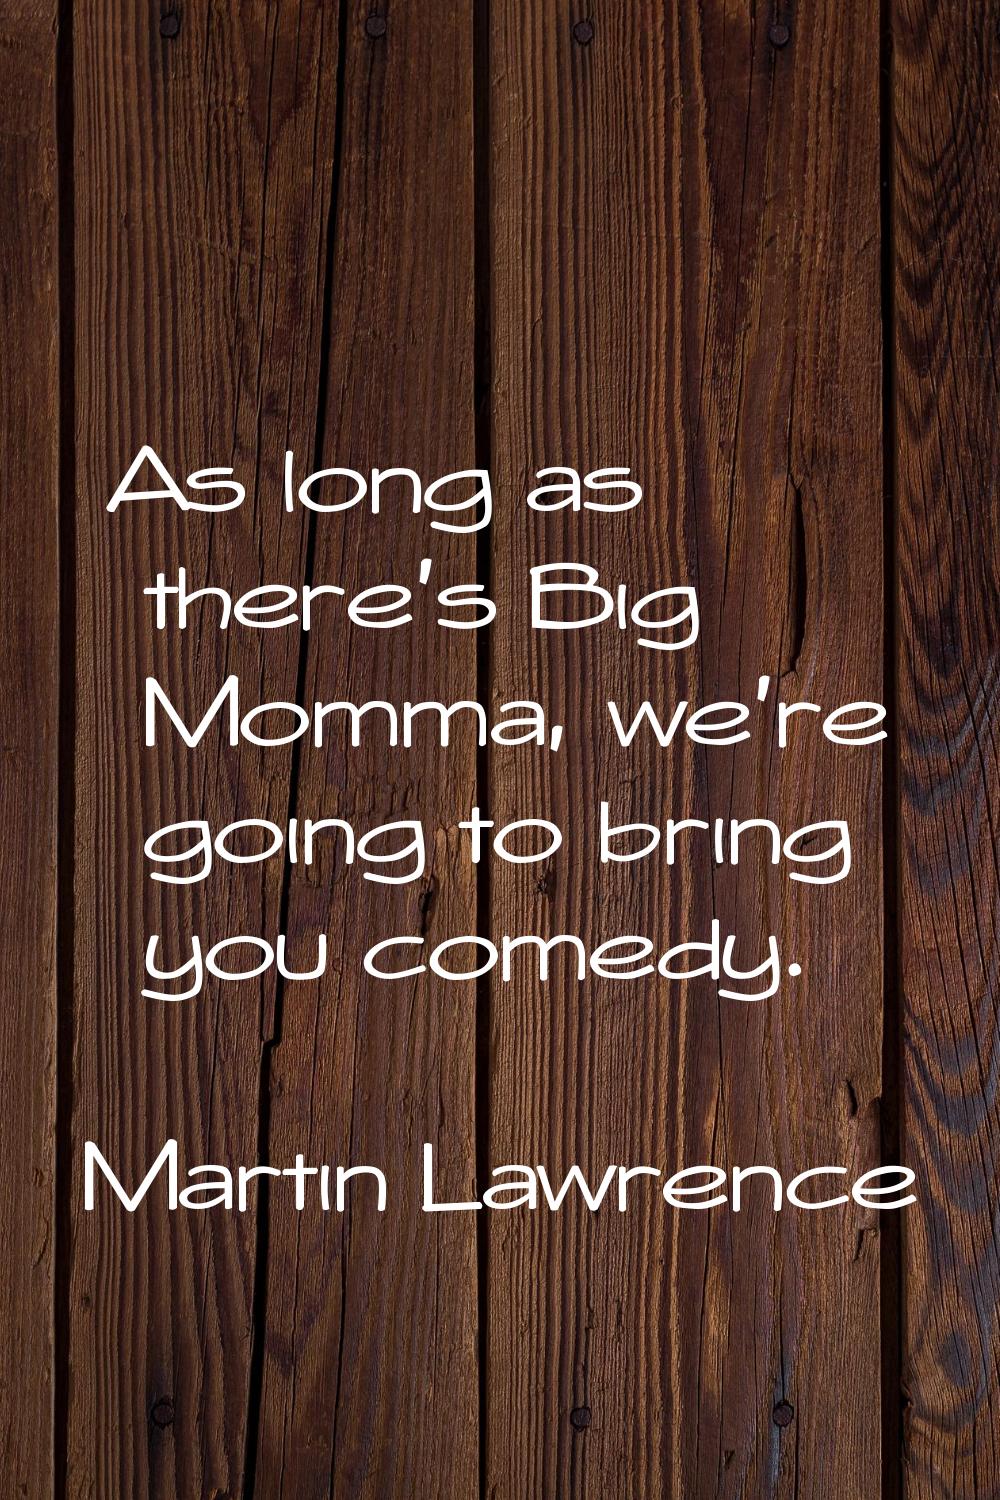 As long as there's Big Momma, we're going to bring you comedy.